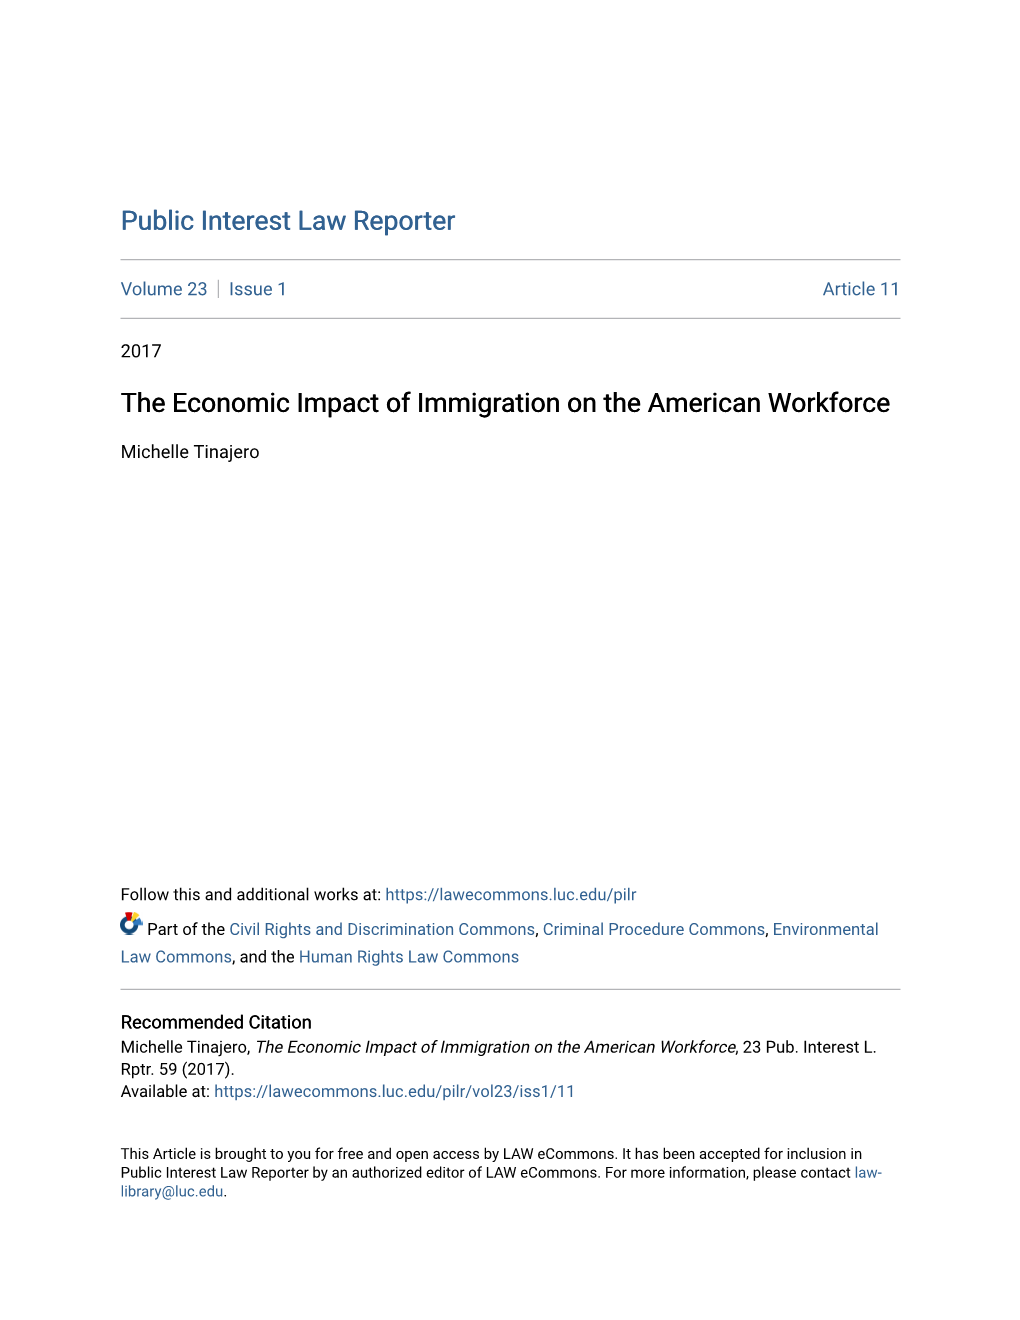 The Economic Impact of Immigration on the American Workforce